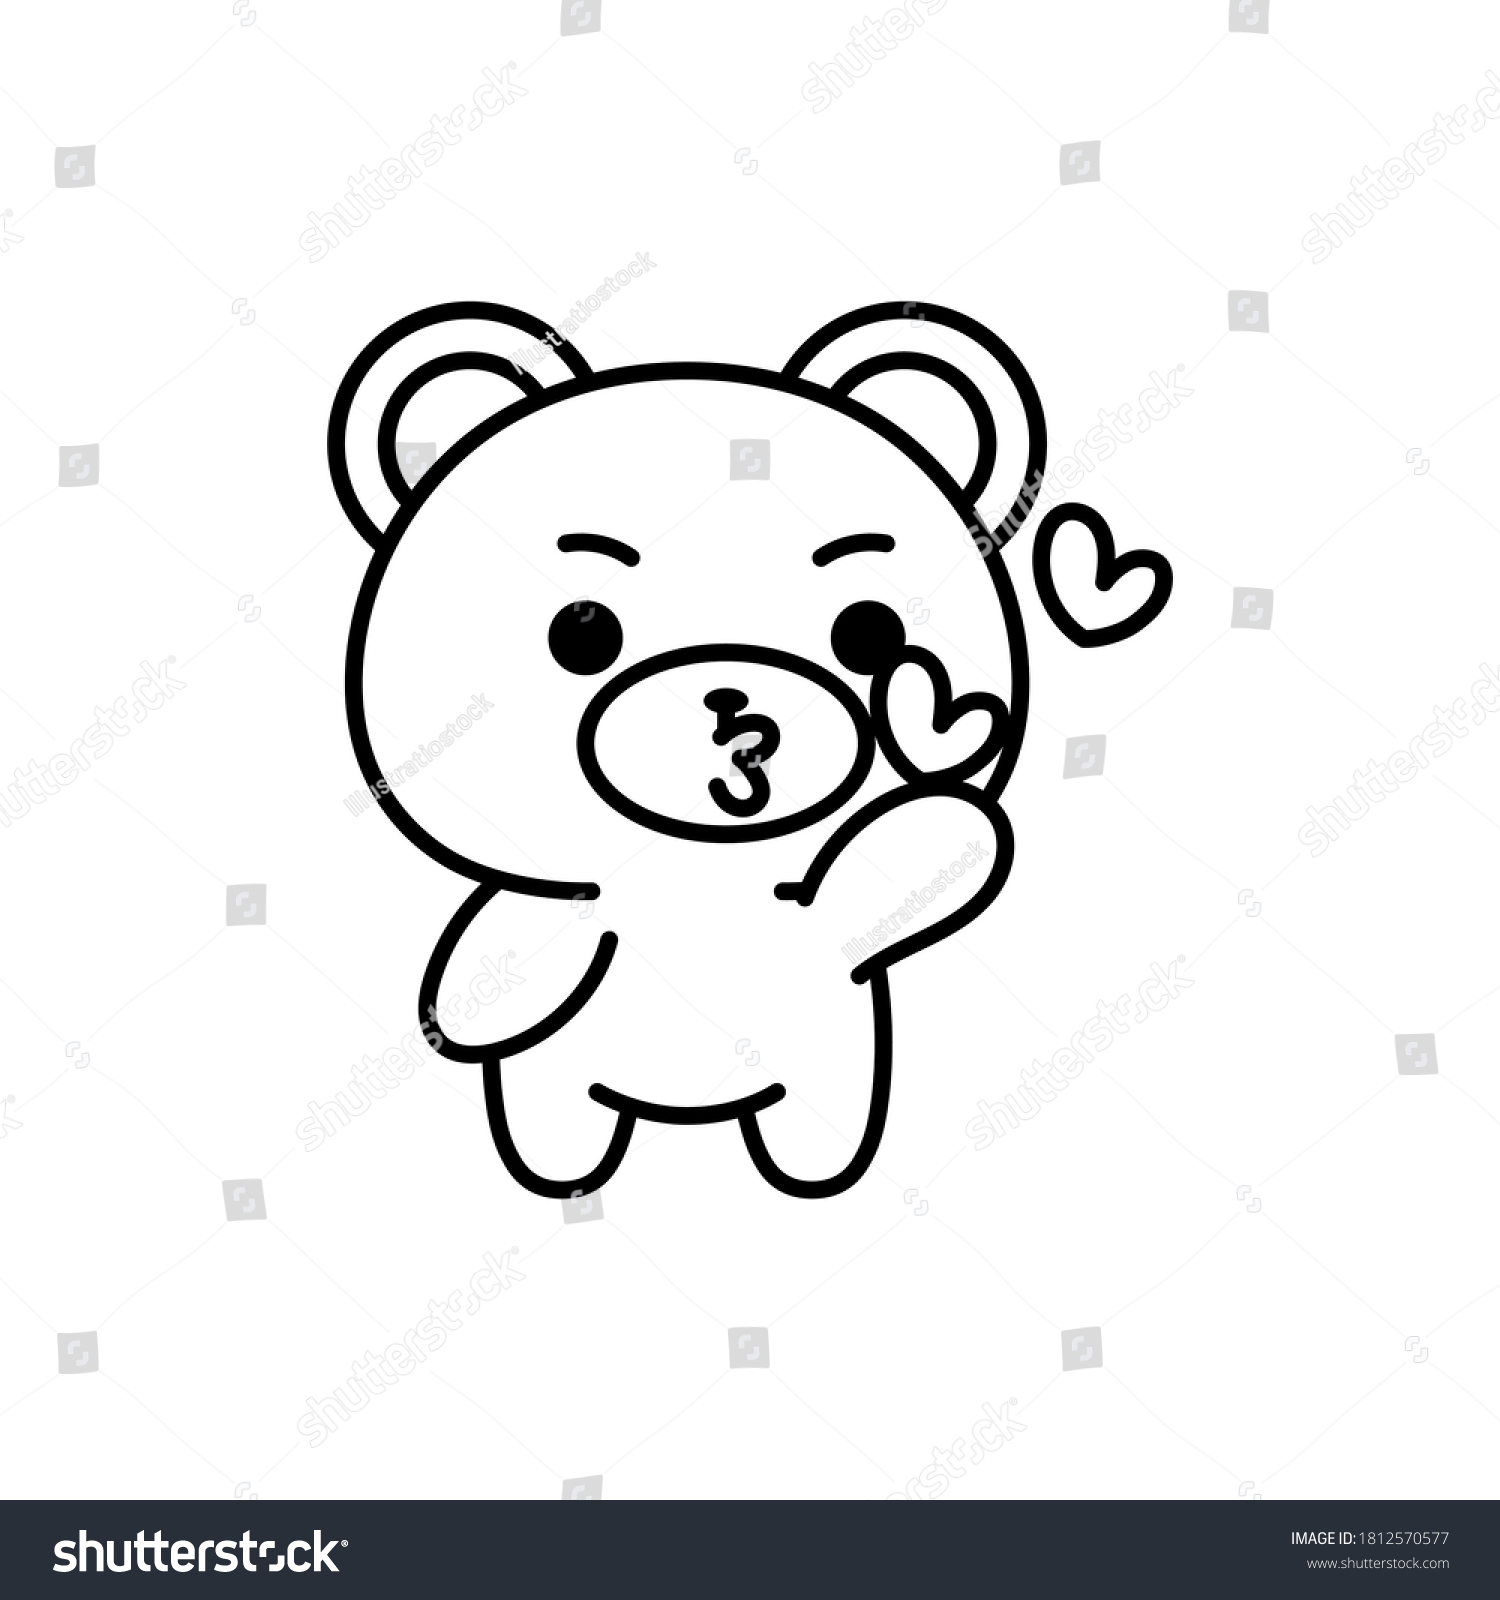 SVG of Isolated bear blowing kisses. Emoji of a bear - Vector svg